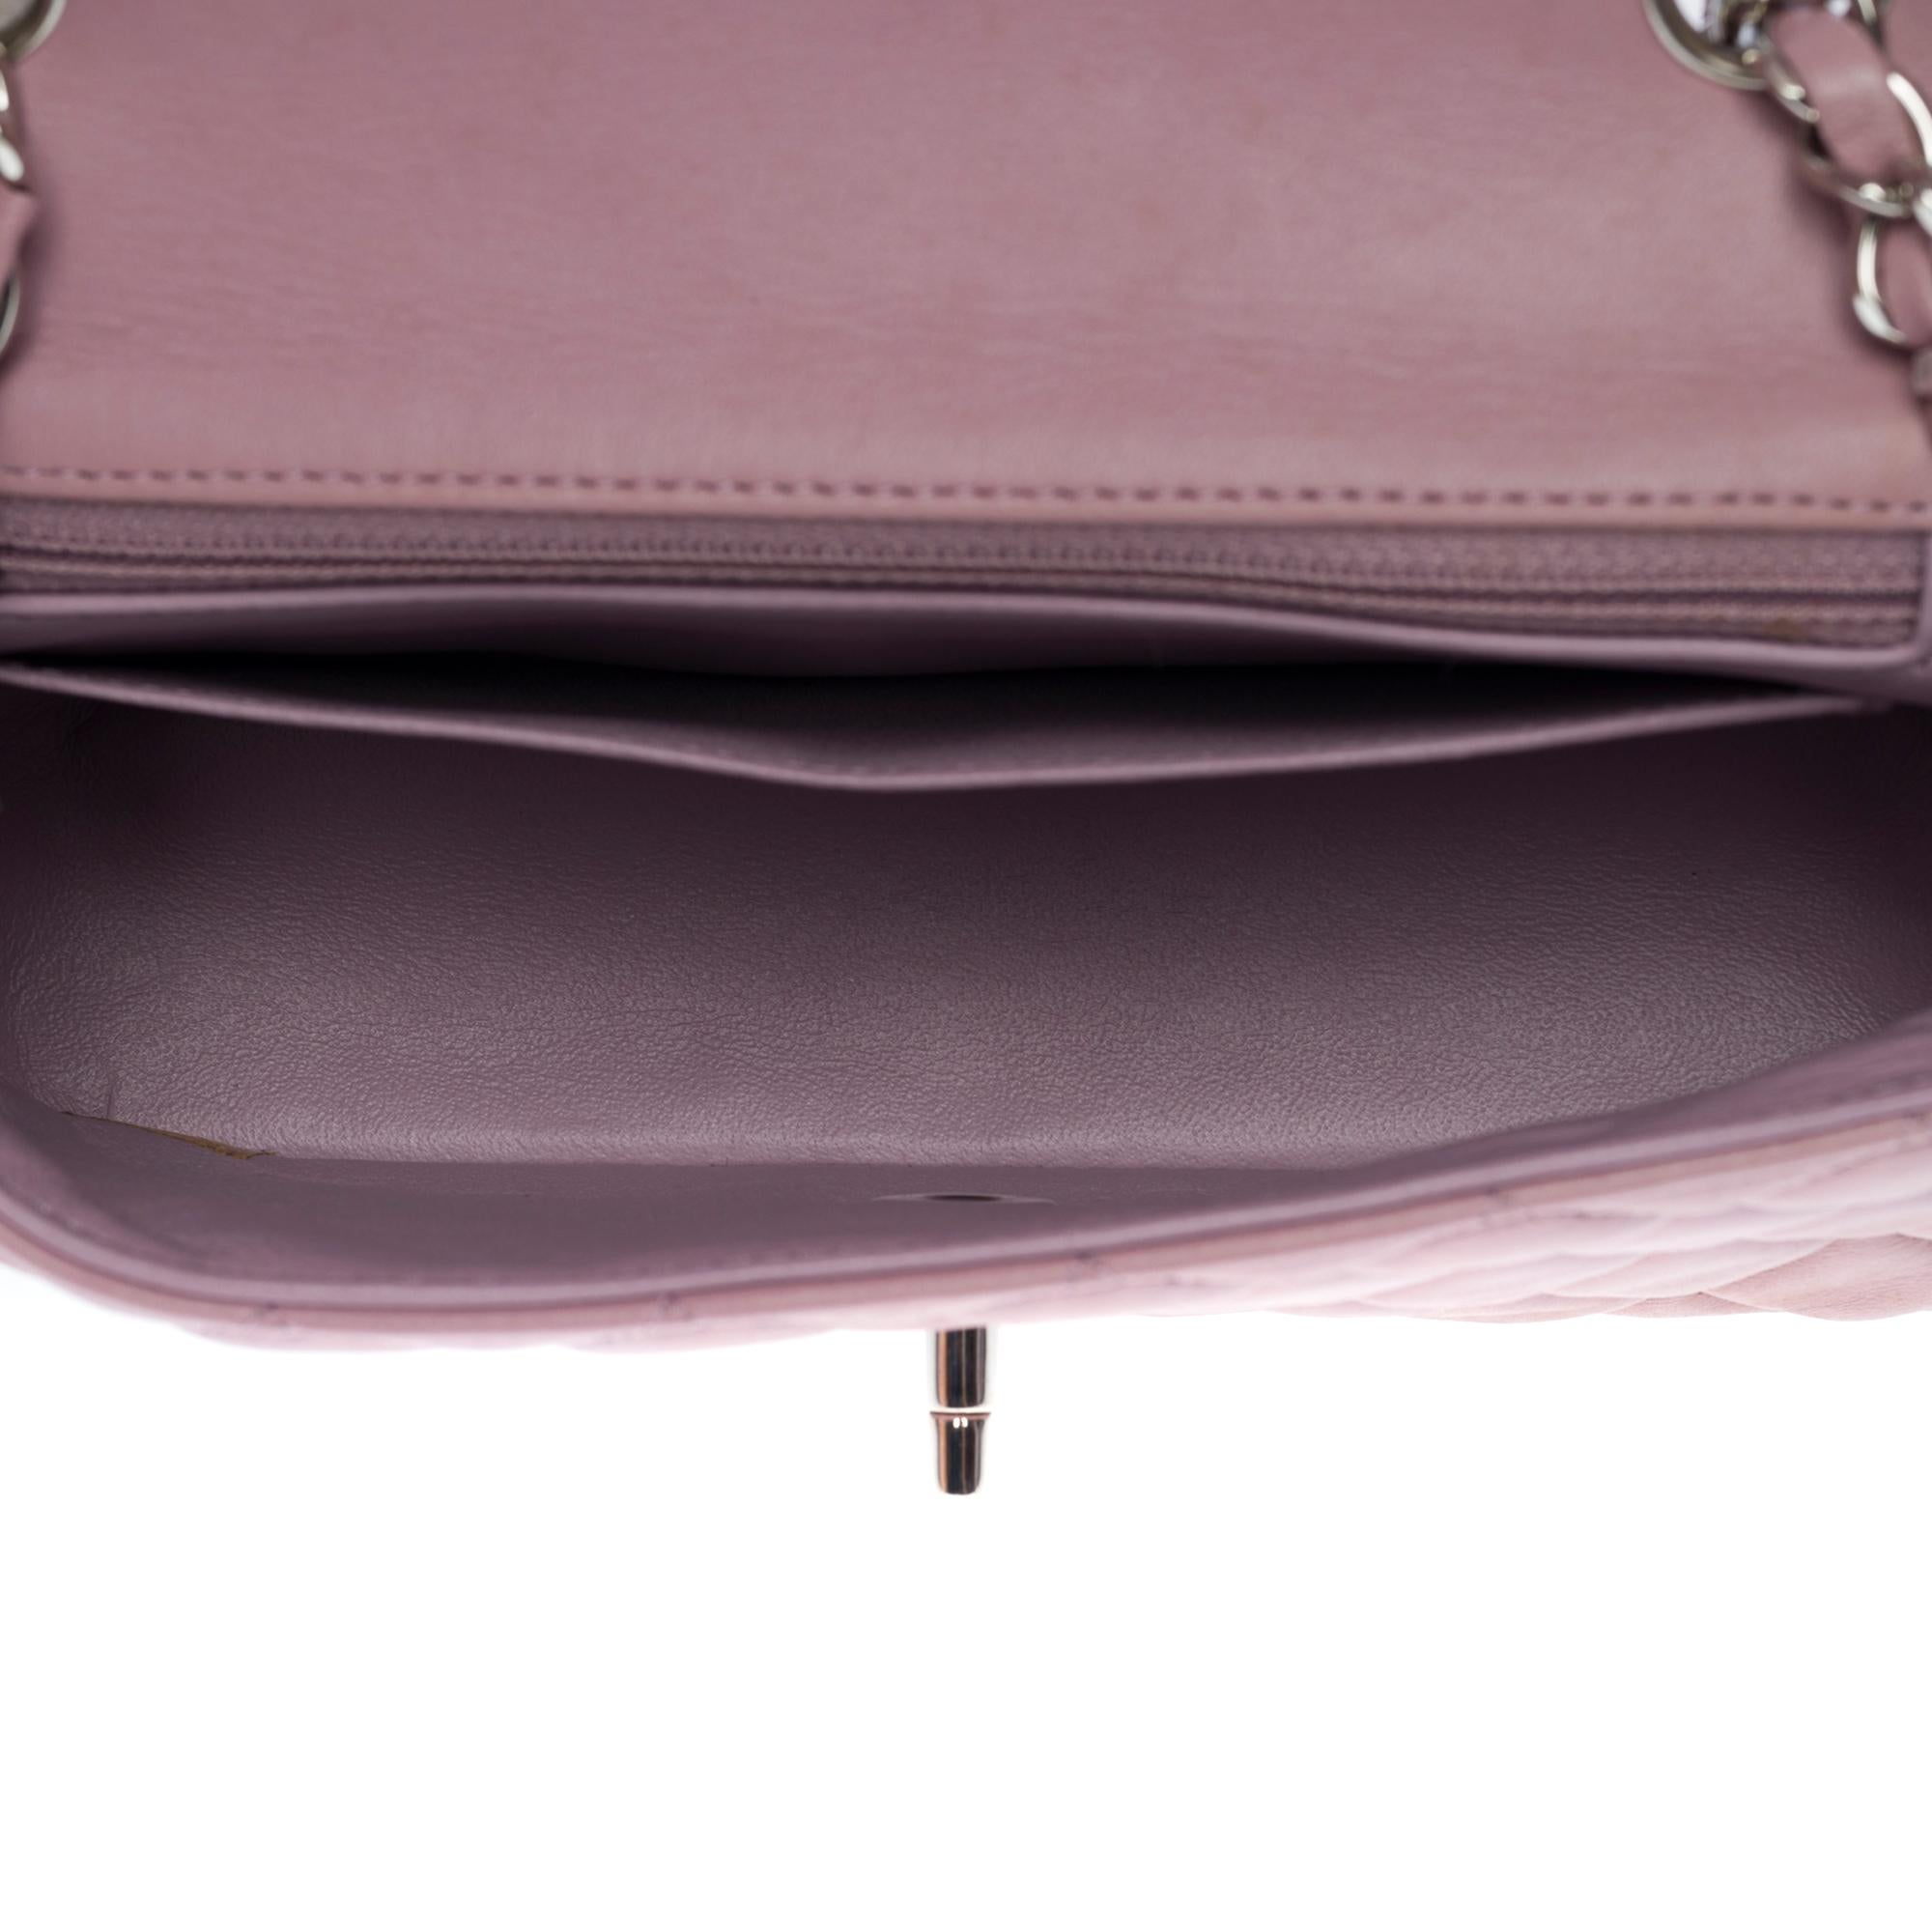 Splendid Chanel Timeless Mini Flap bag in lilac quilted lambskin leather, SHW 4